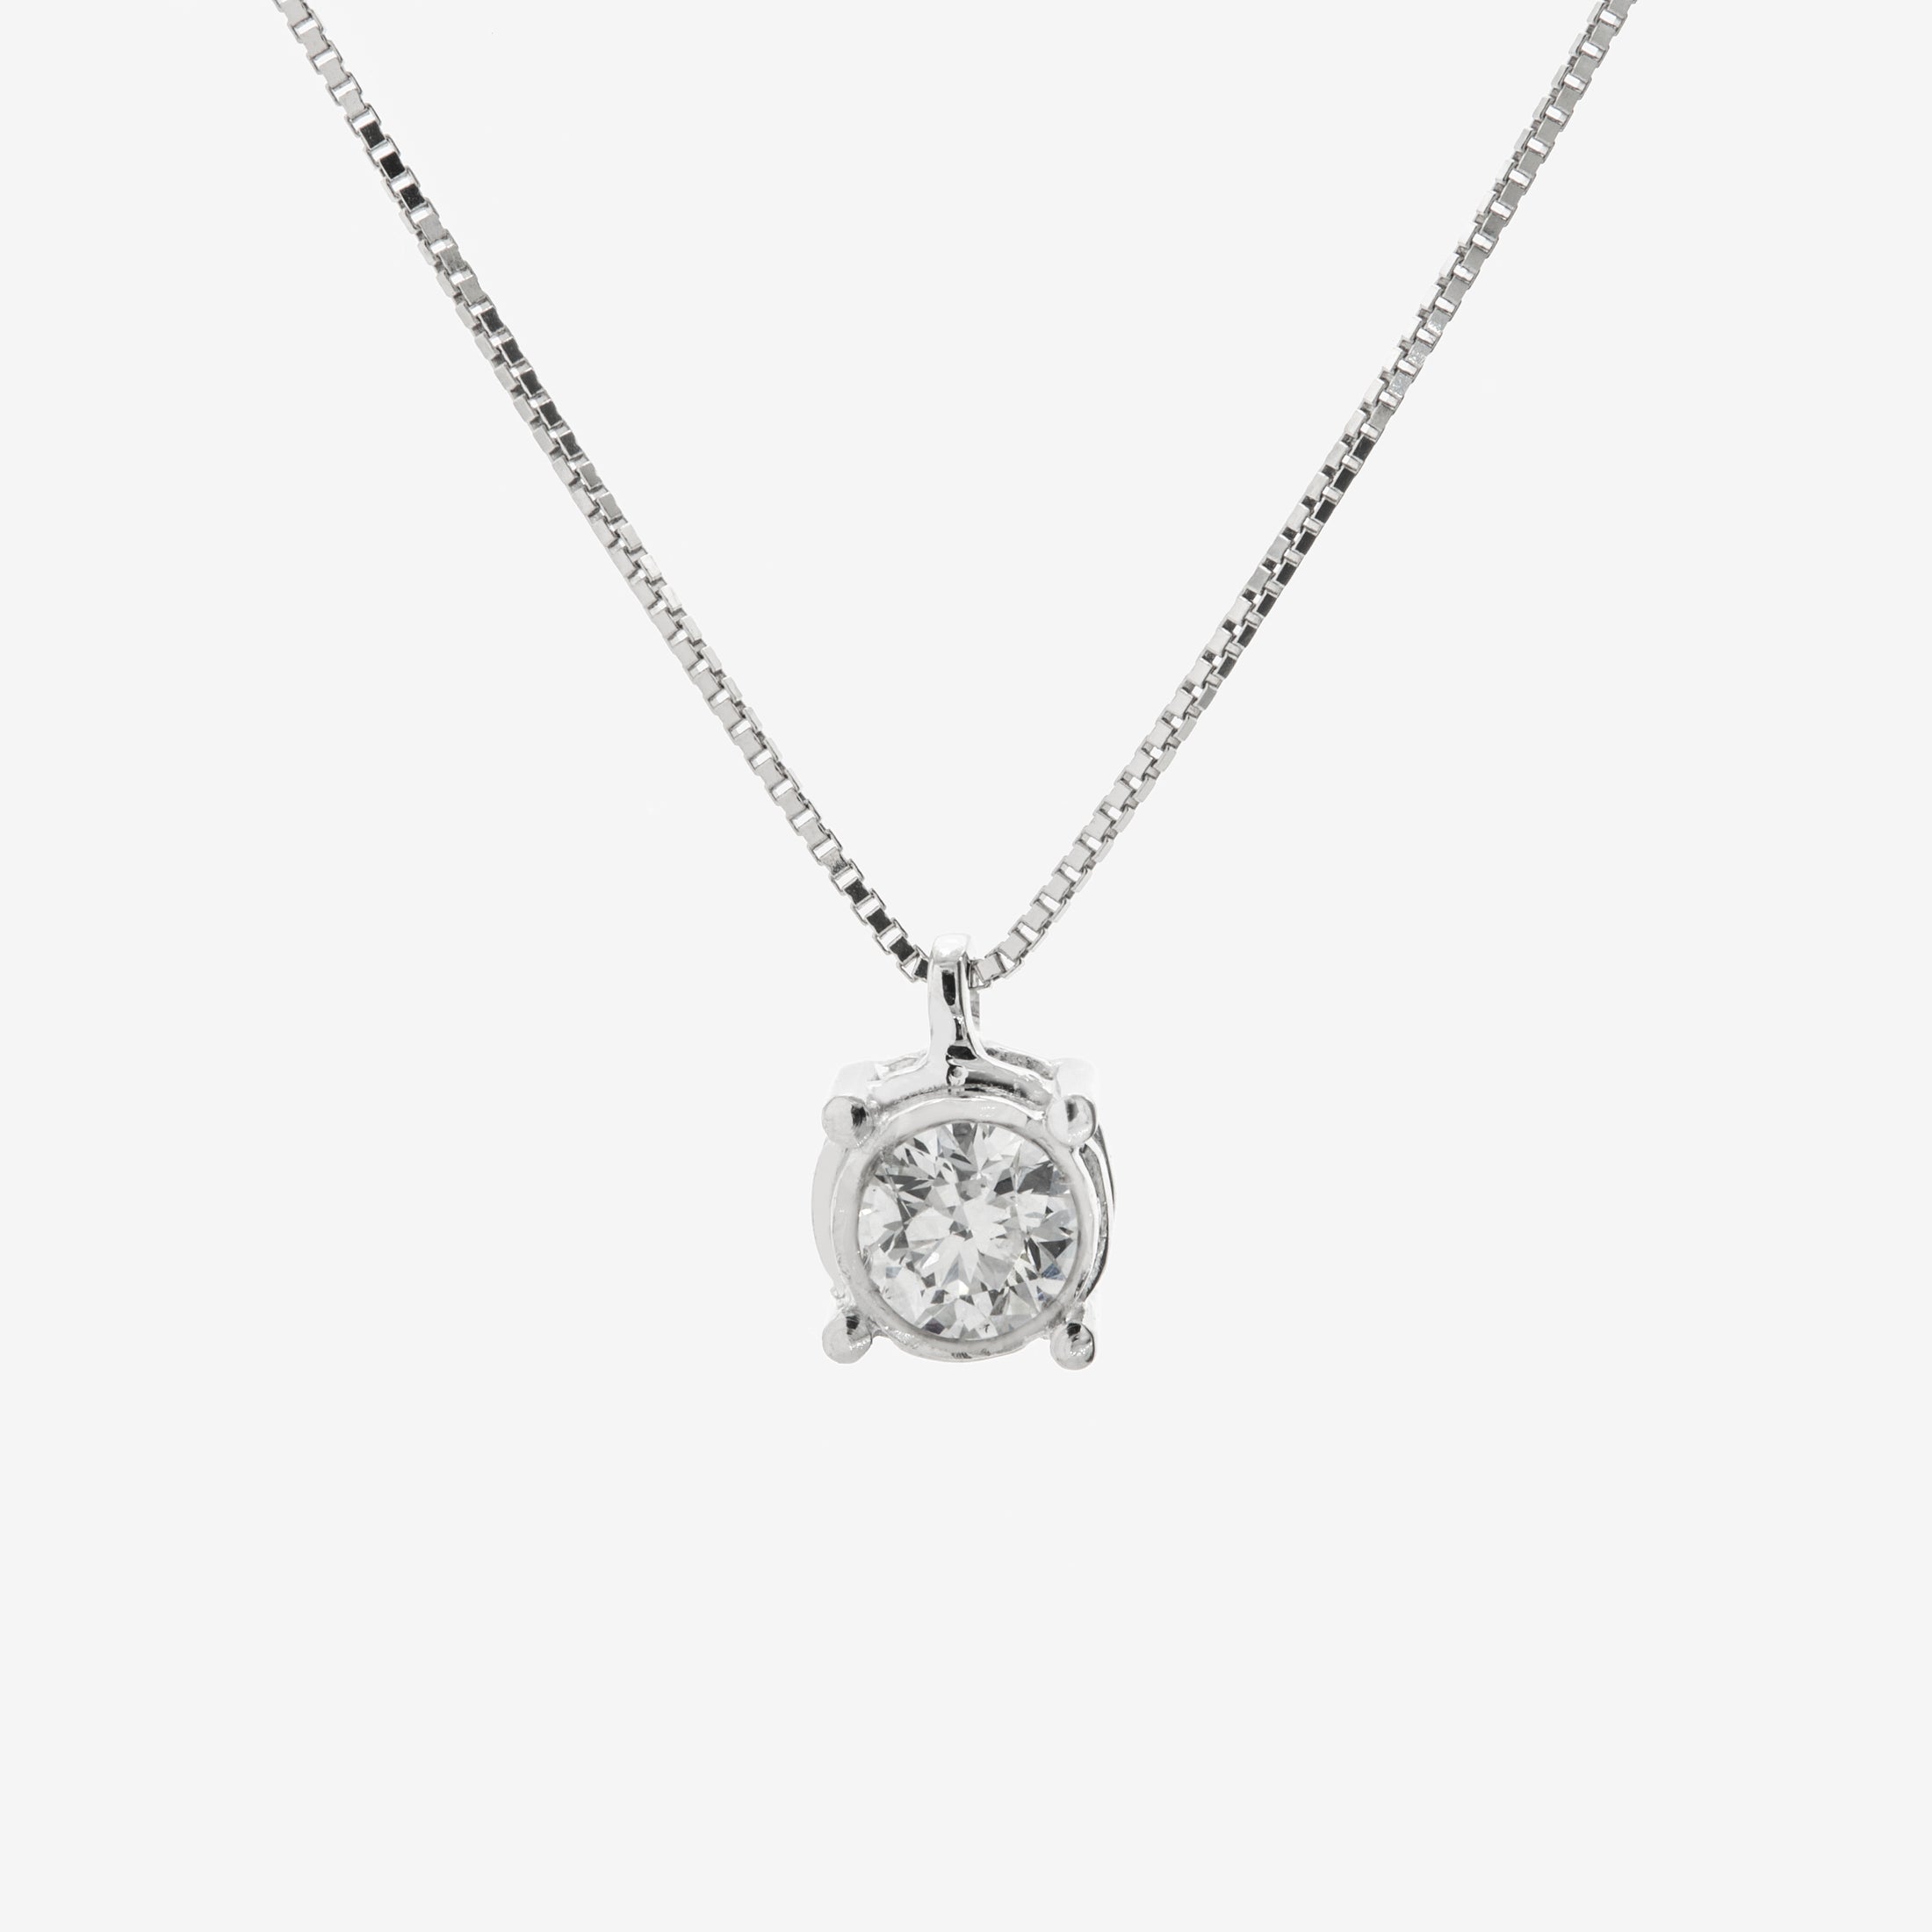 New disketto necklace with diamonds 